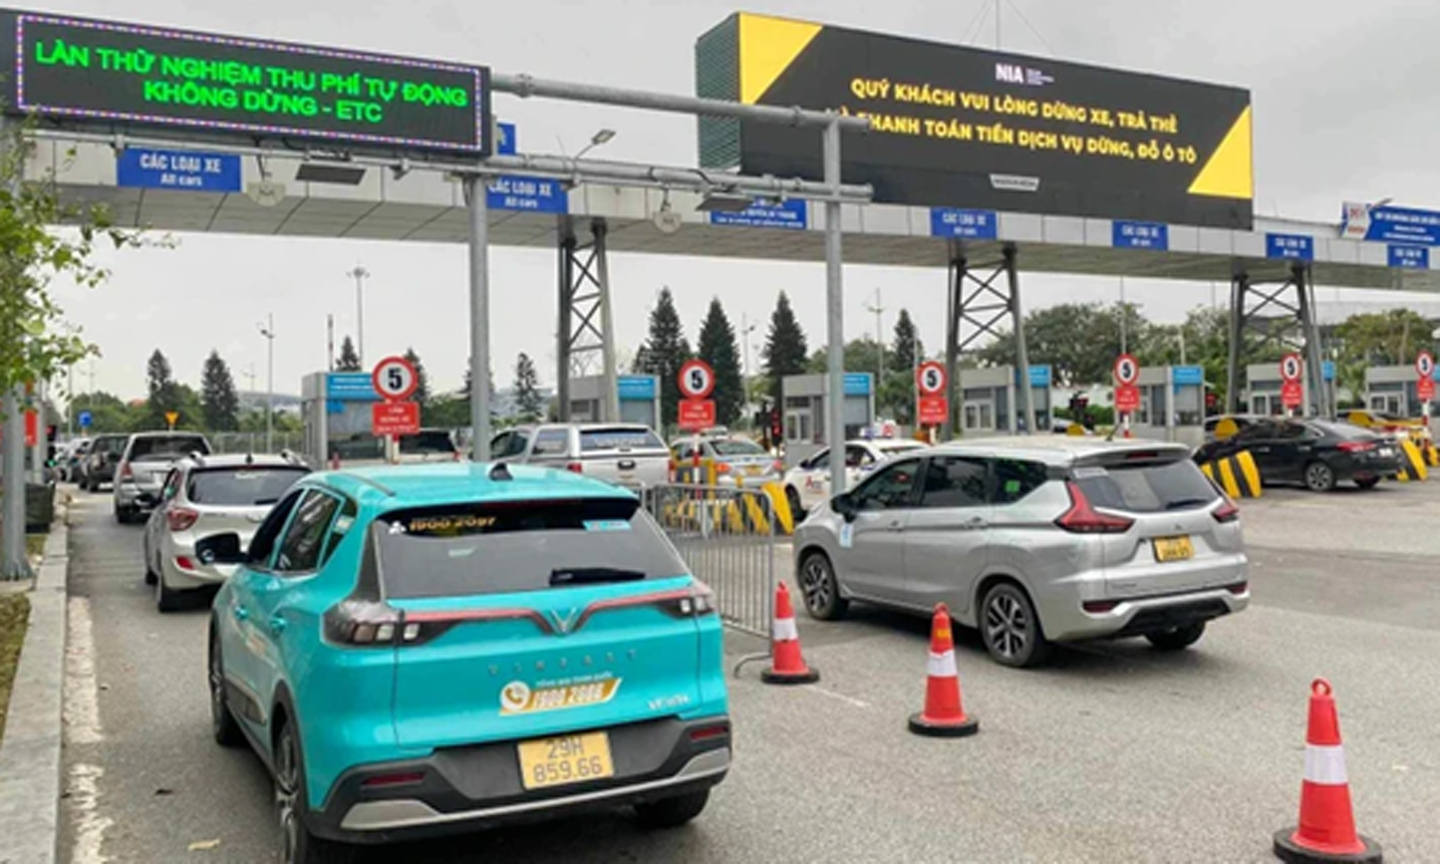 ABO/NDO- The electronic toll collection (ETC) system will be officially and simultaneously implemented at five airports namely Noi Bai, Cat Bi, Phu Bai, Da Nang and Tan Son Nhat from May 5